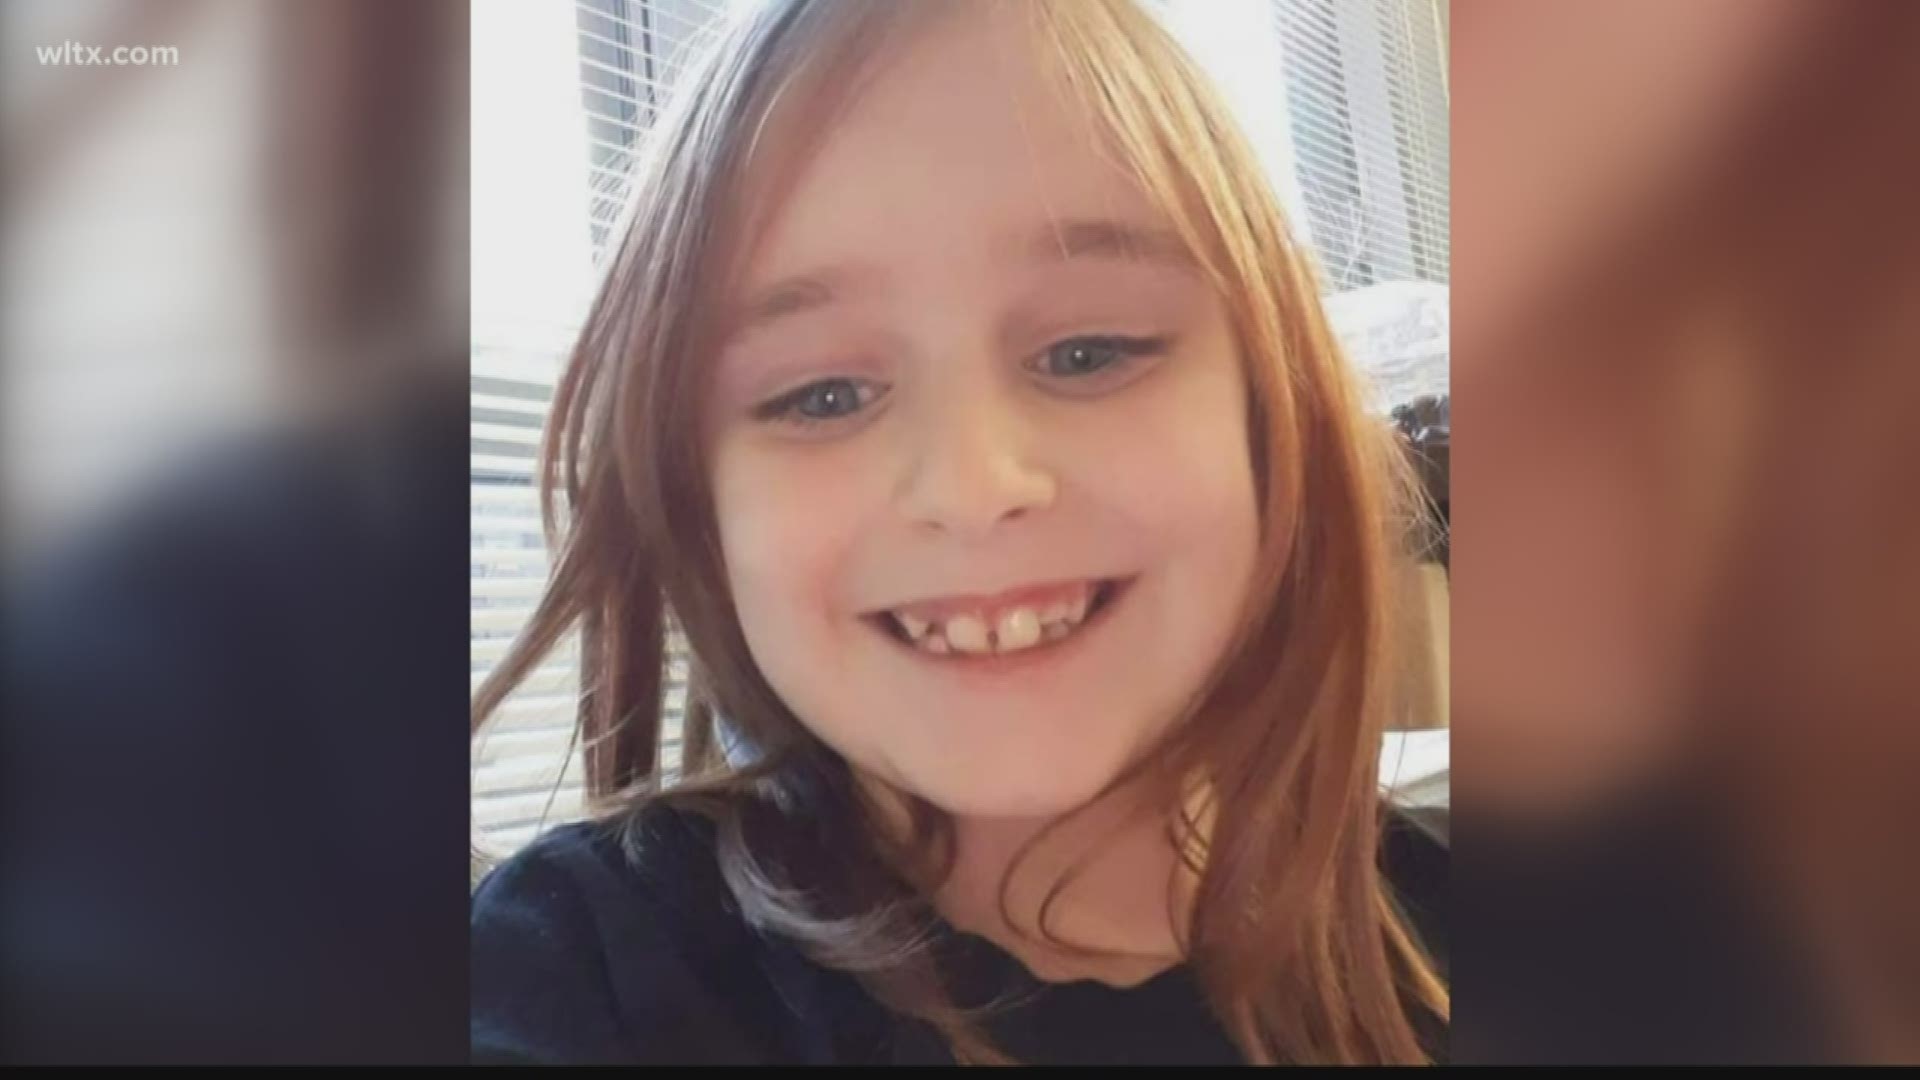 The city of Cayce mourns the loss of 6-year-old Faye Swetlik.